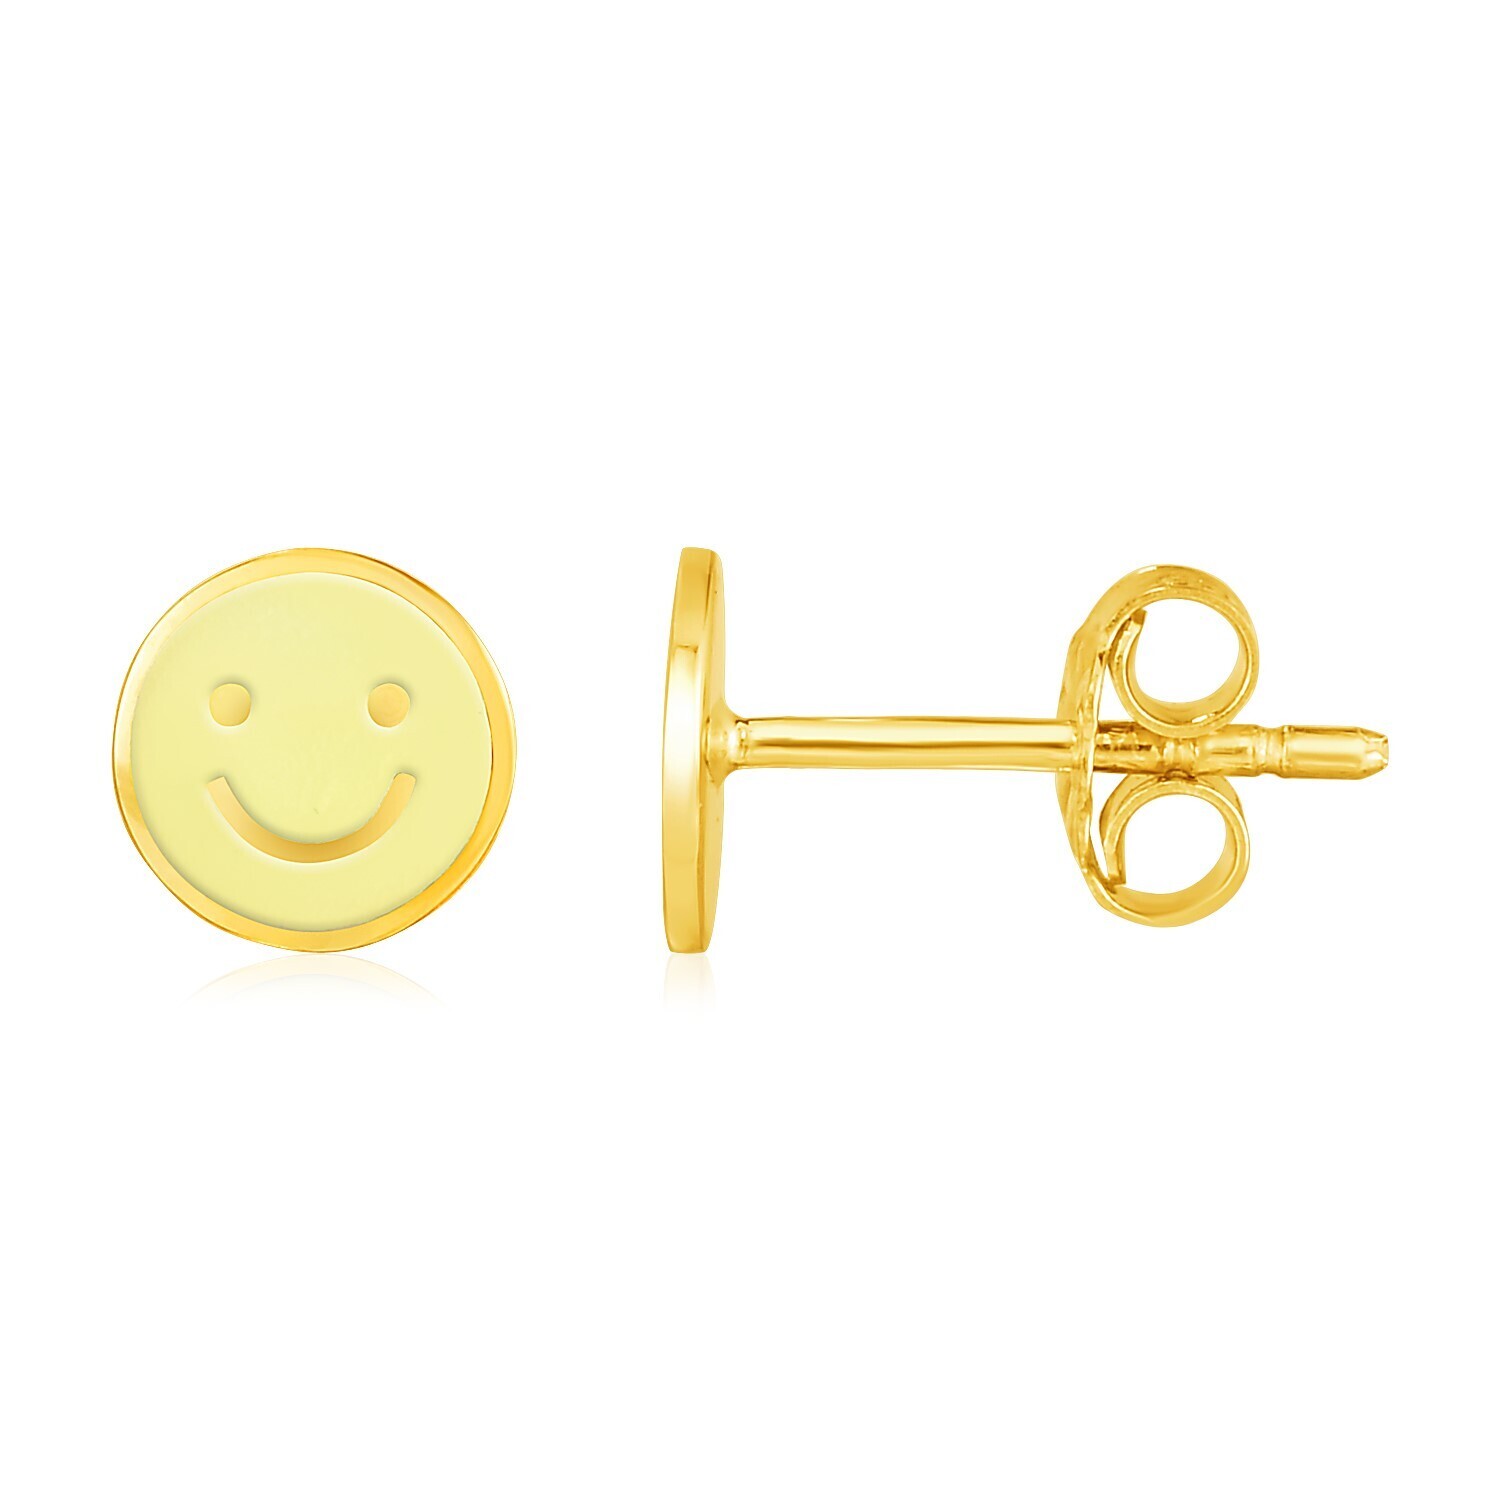 14k Yellow Gold and Enamel Yellow Smiley Face Stud Earrings